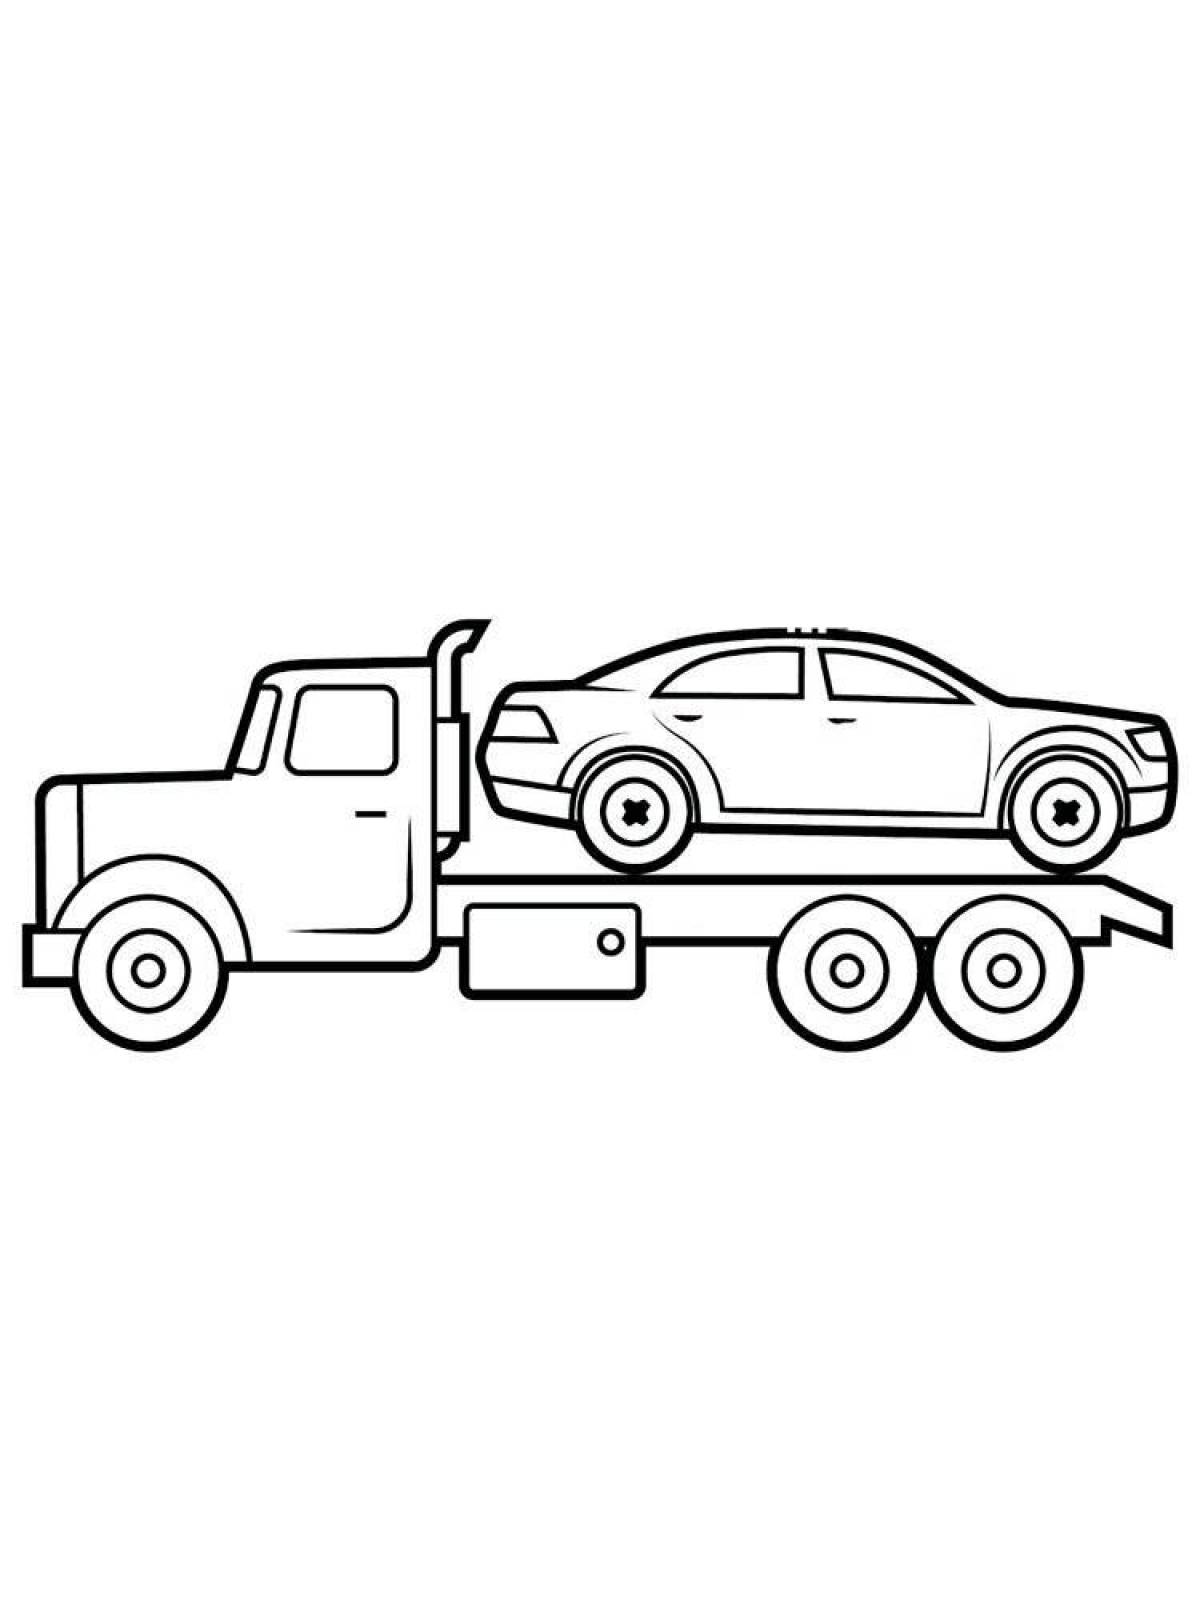 Fun tow truck coloring page